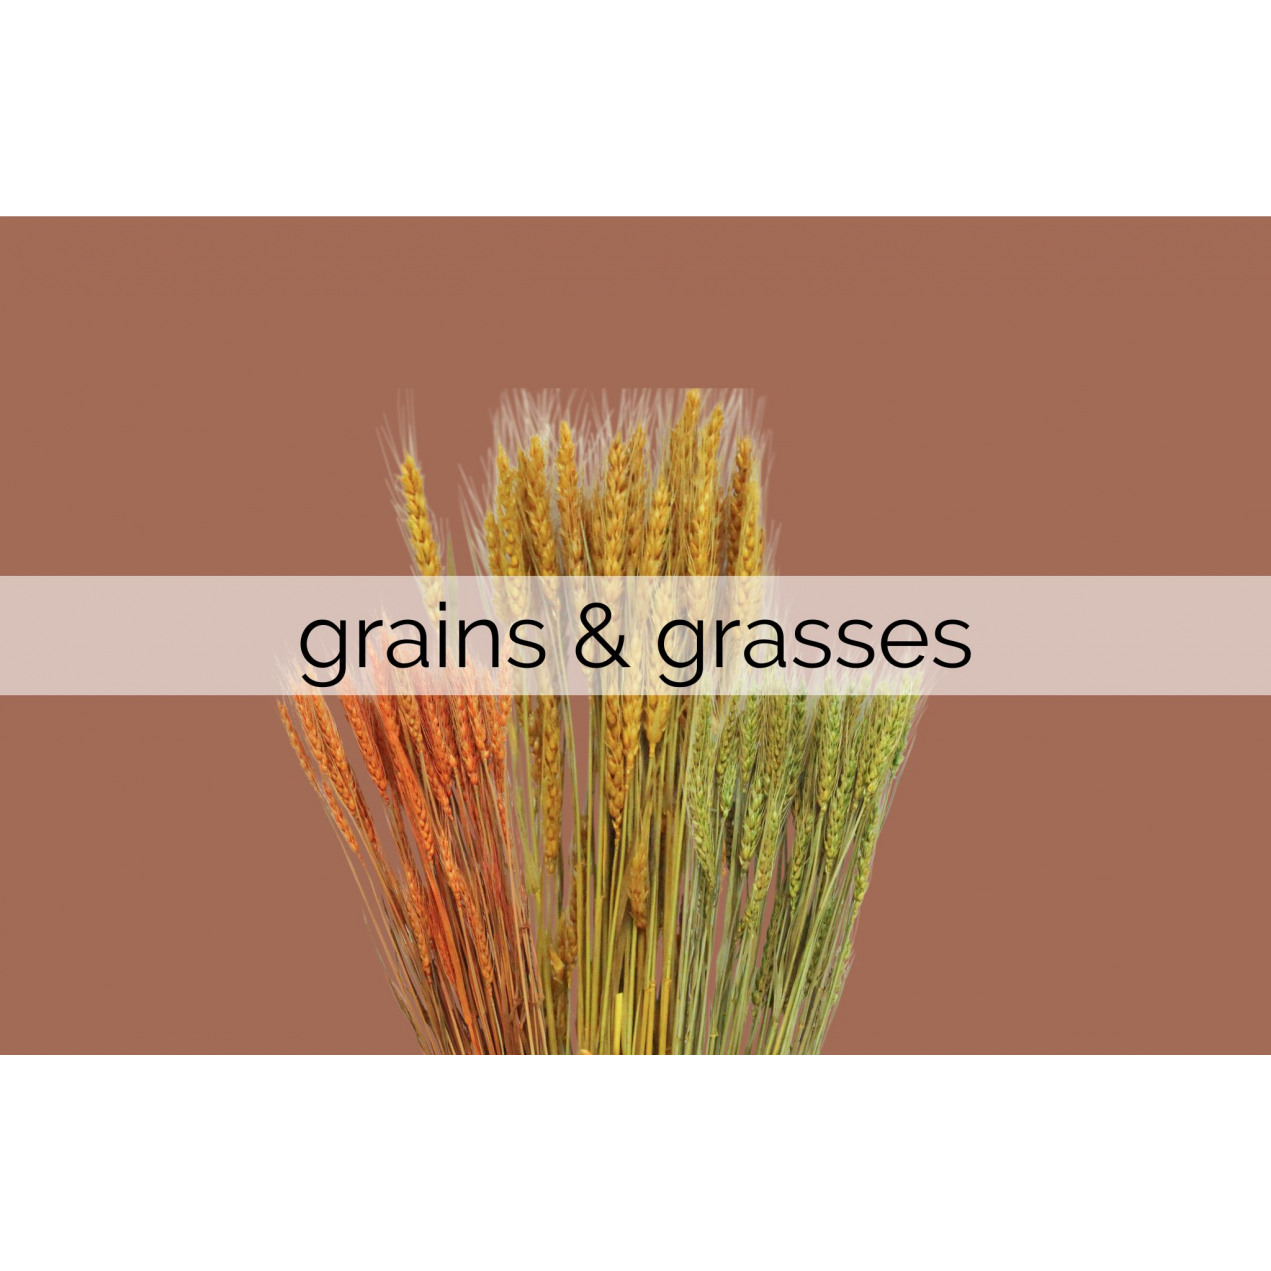 grains and grasses